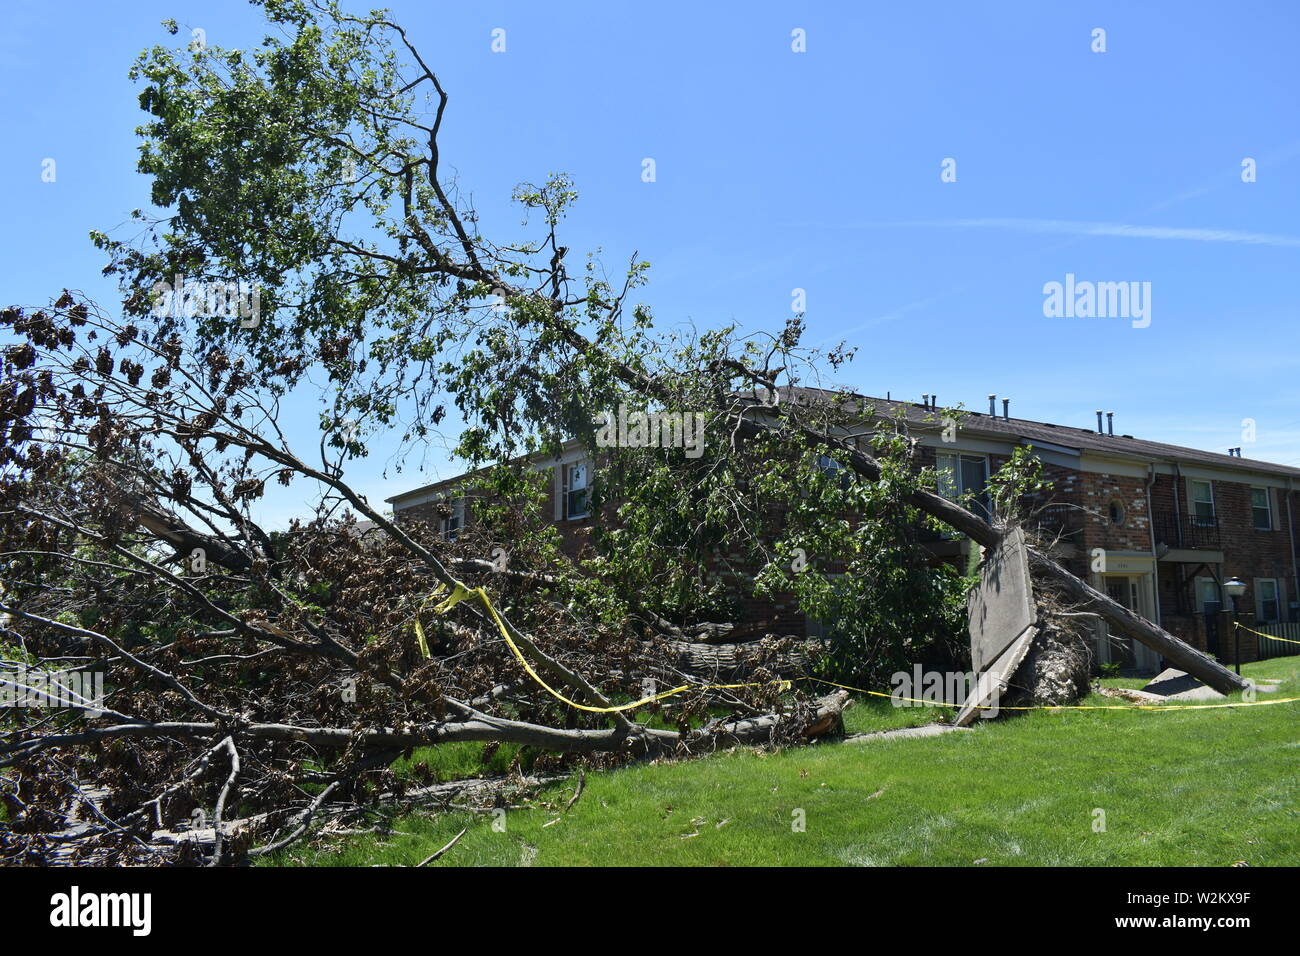 Tornado damage that occurred on the 27ty of May 2019 in the Dayton, Ohio vicinity. Stock Photo